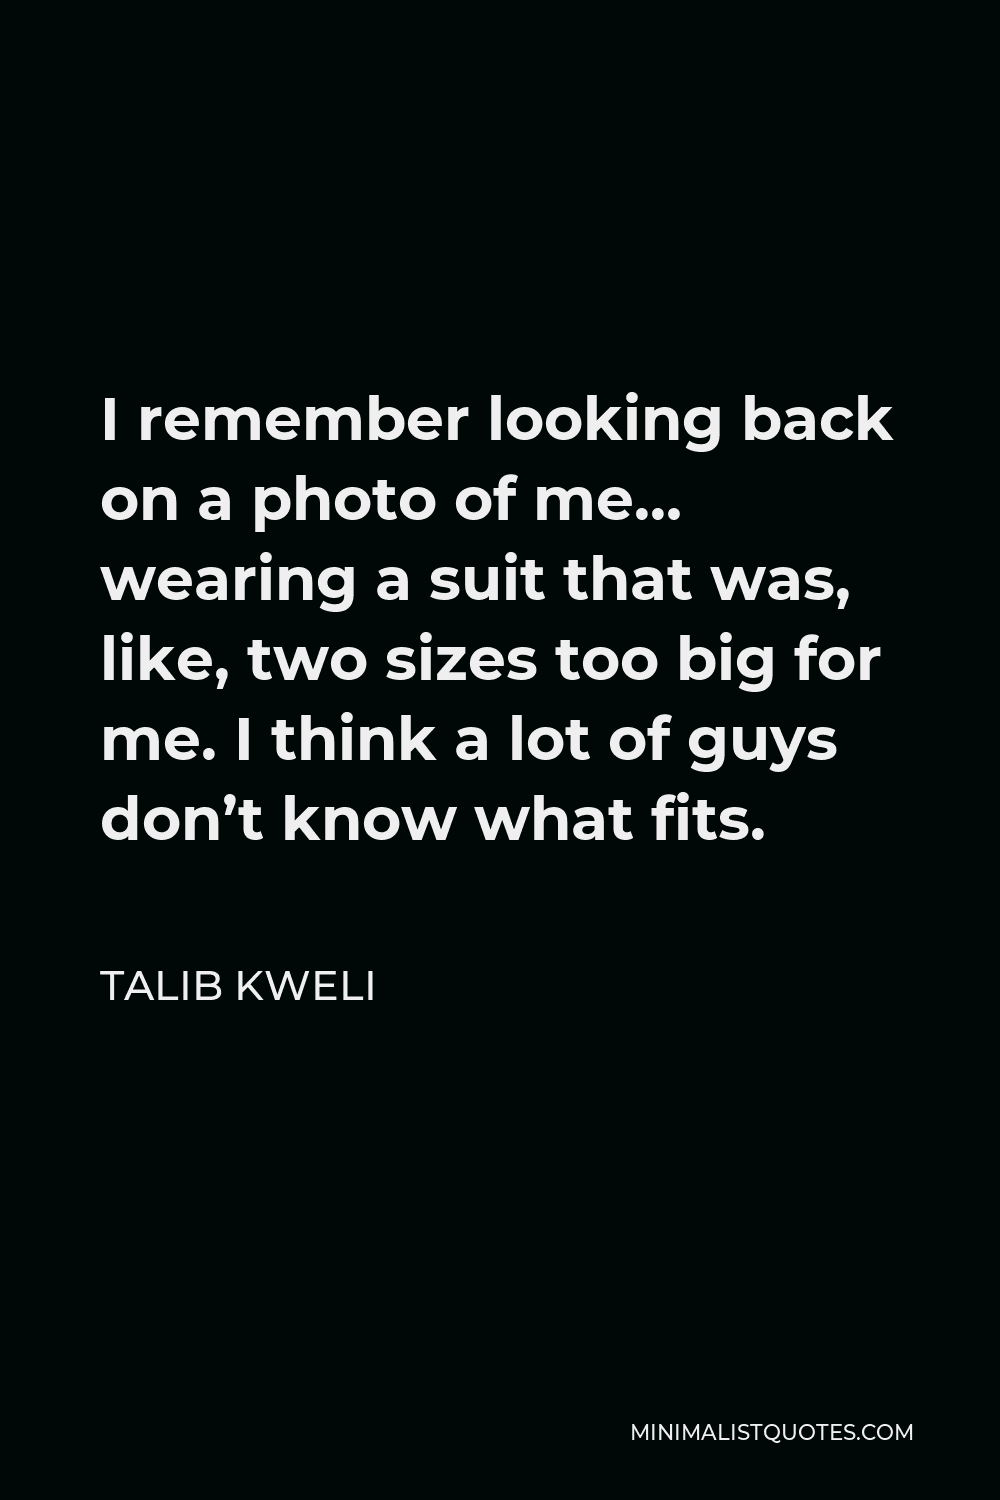 Talib Kweli Quote - I remember looking back on a photo of me… wearing a suit that was, like, two sizes too big for me. I think a lot of guys don’t know what fits.